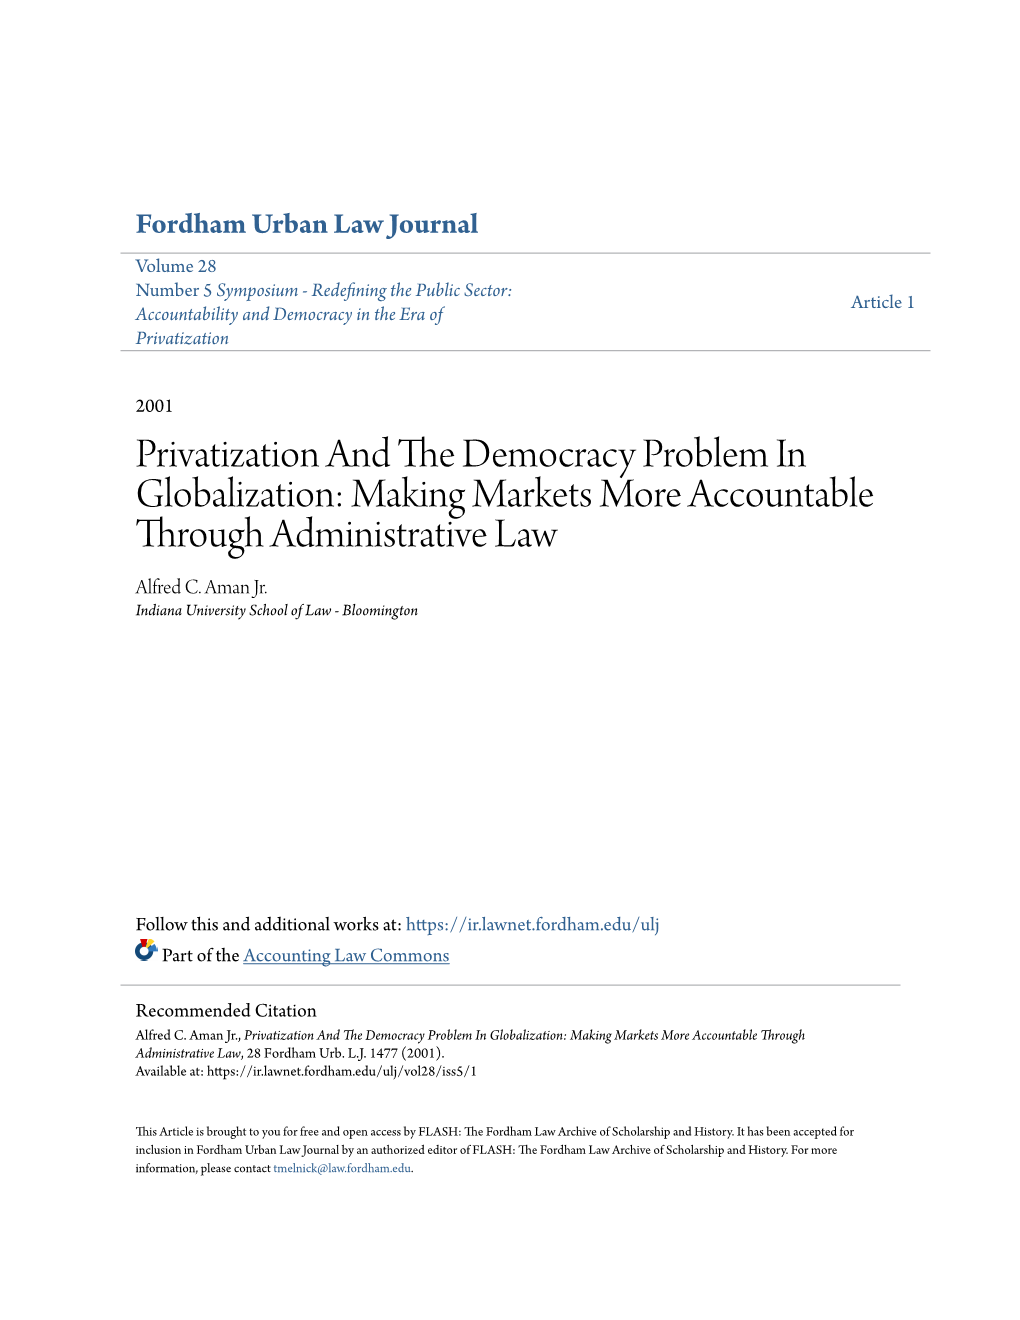 Privatization and the Democracy Problem in Globalization: Making Markets More Accountable Through Administrative Law, 28 Fordham Urb